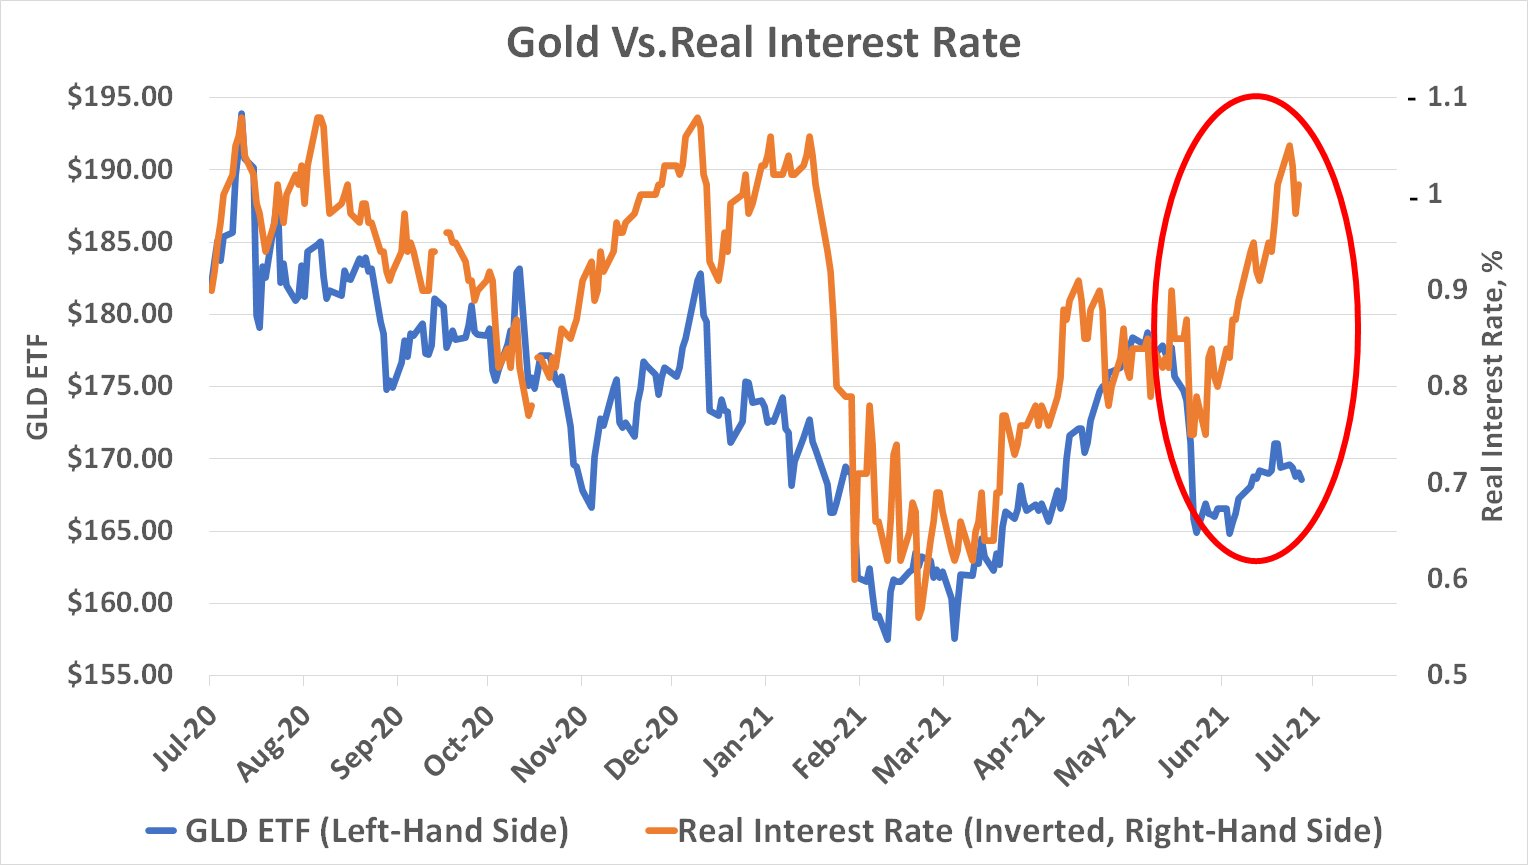 Gold Vs. Real Interest Rate